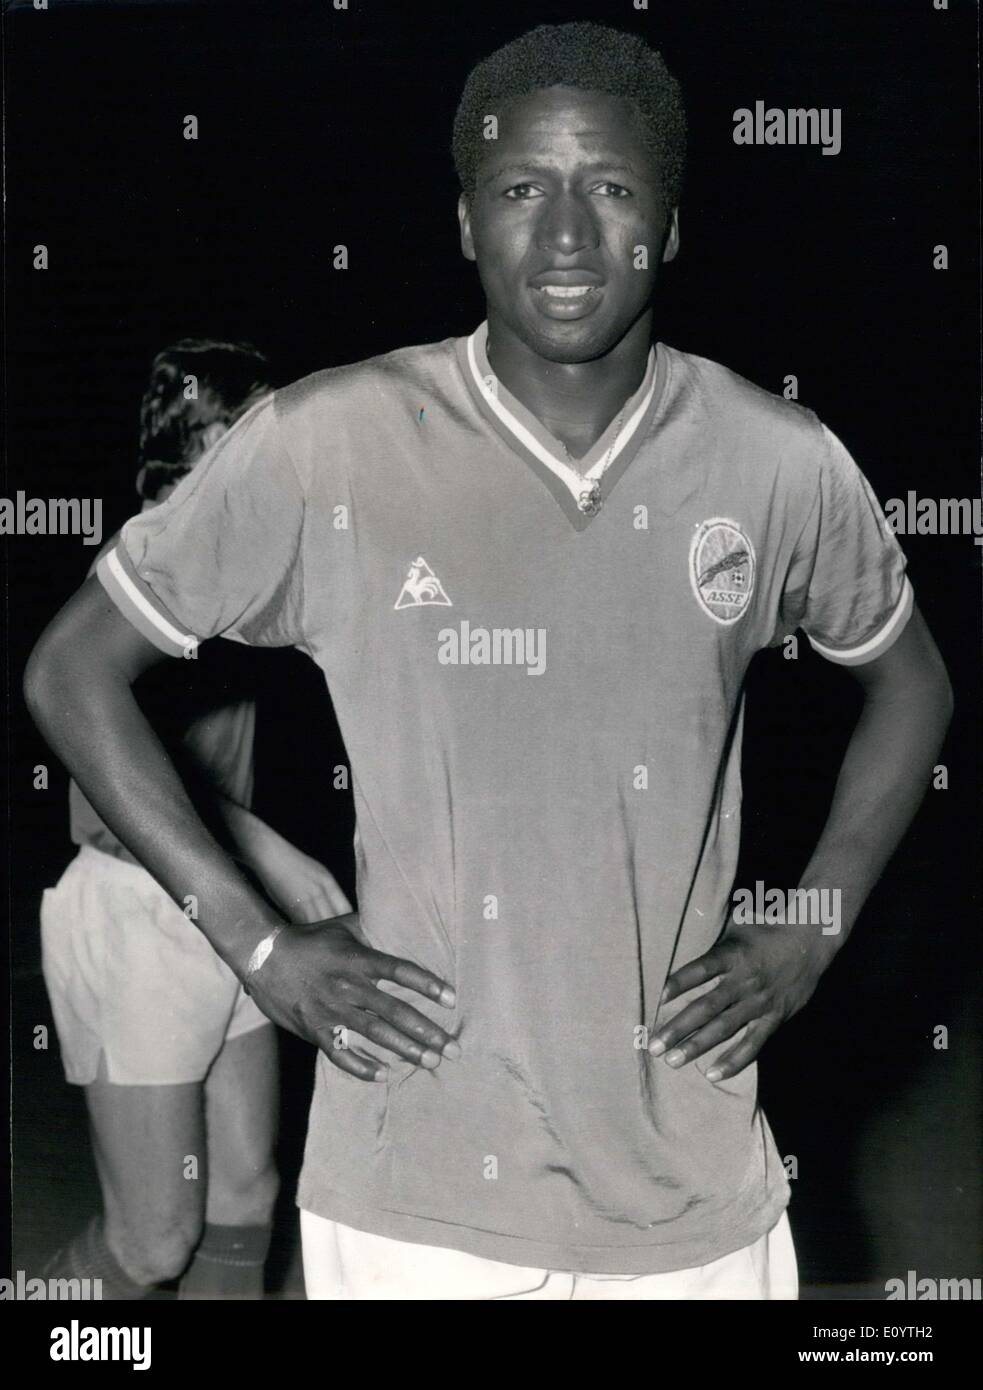 Jun. 05, 1971 - He scored 6 of the 8 goals made by his team in a St-Etienne match. Stock Photo